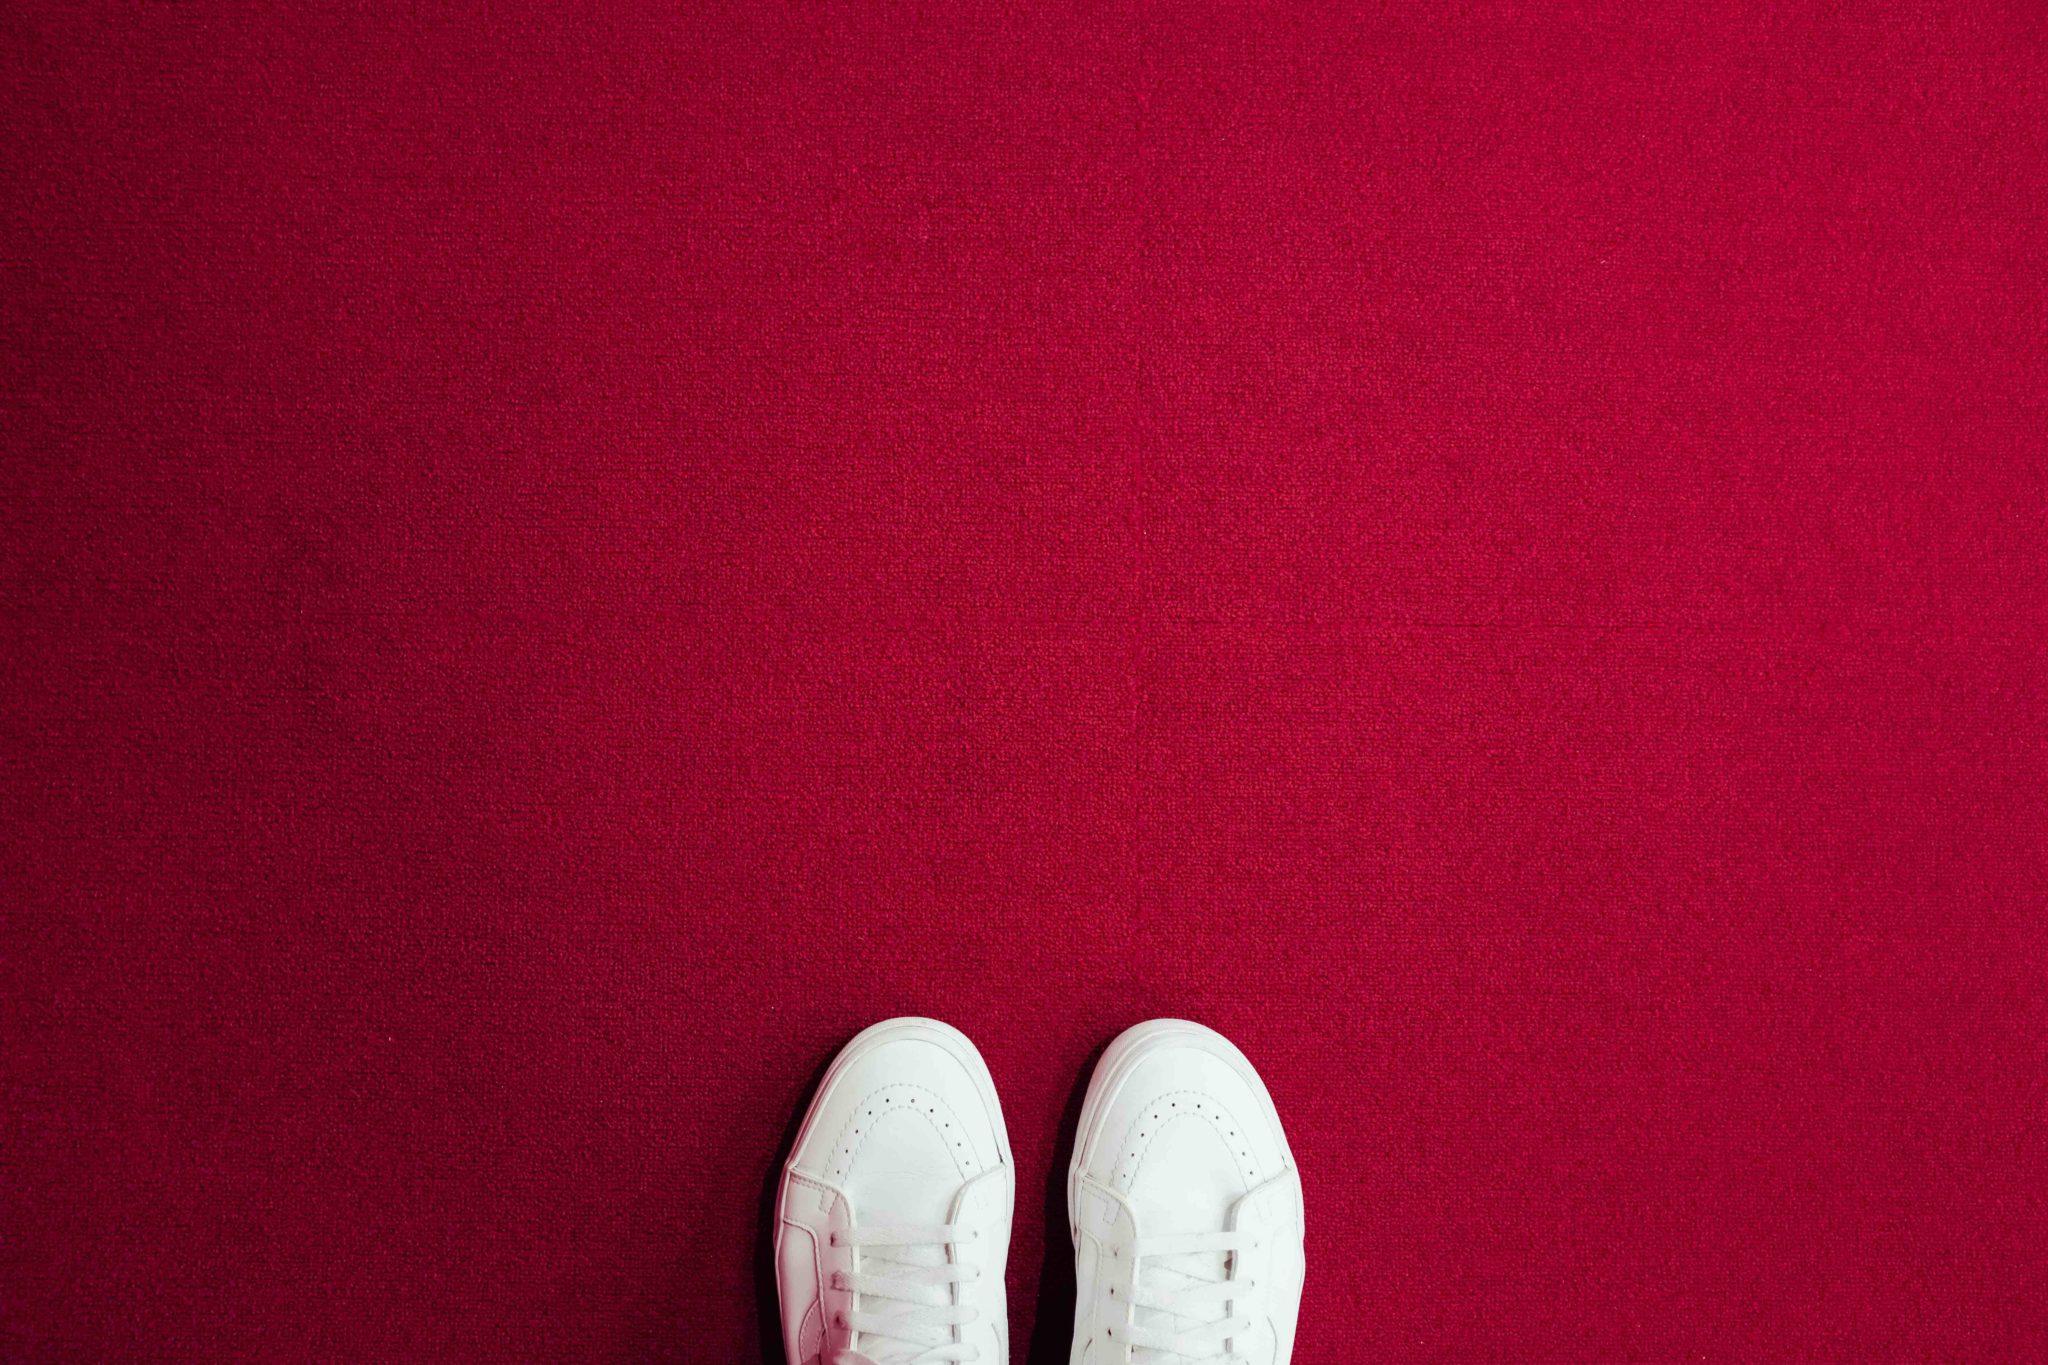 feet in white shoes on red carpet